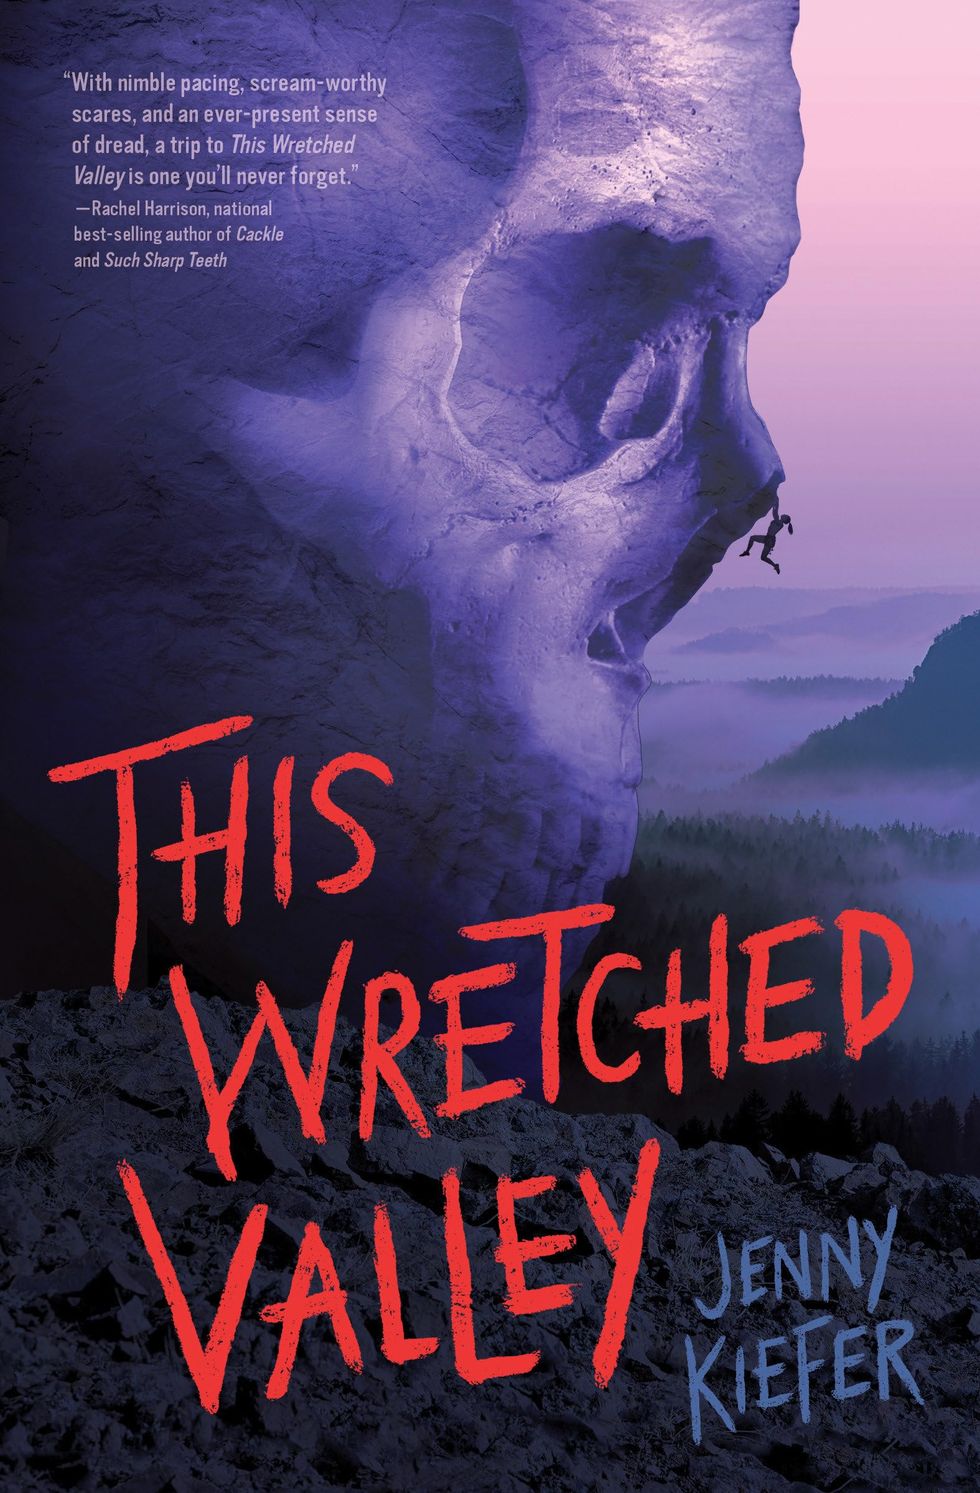 This Wretched Valley, by Jenny Kiefer